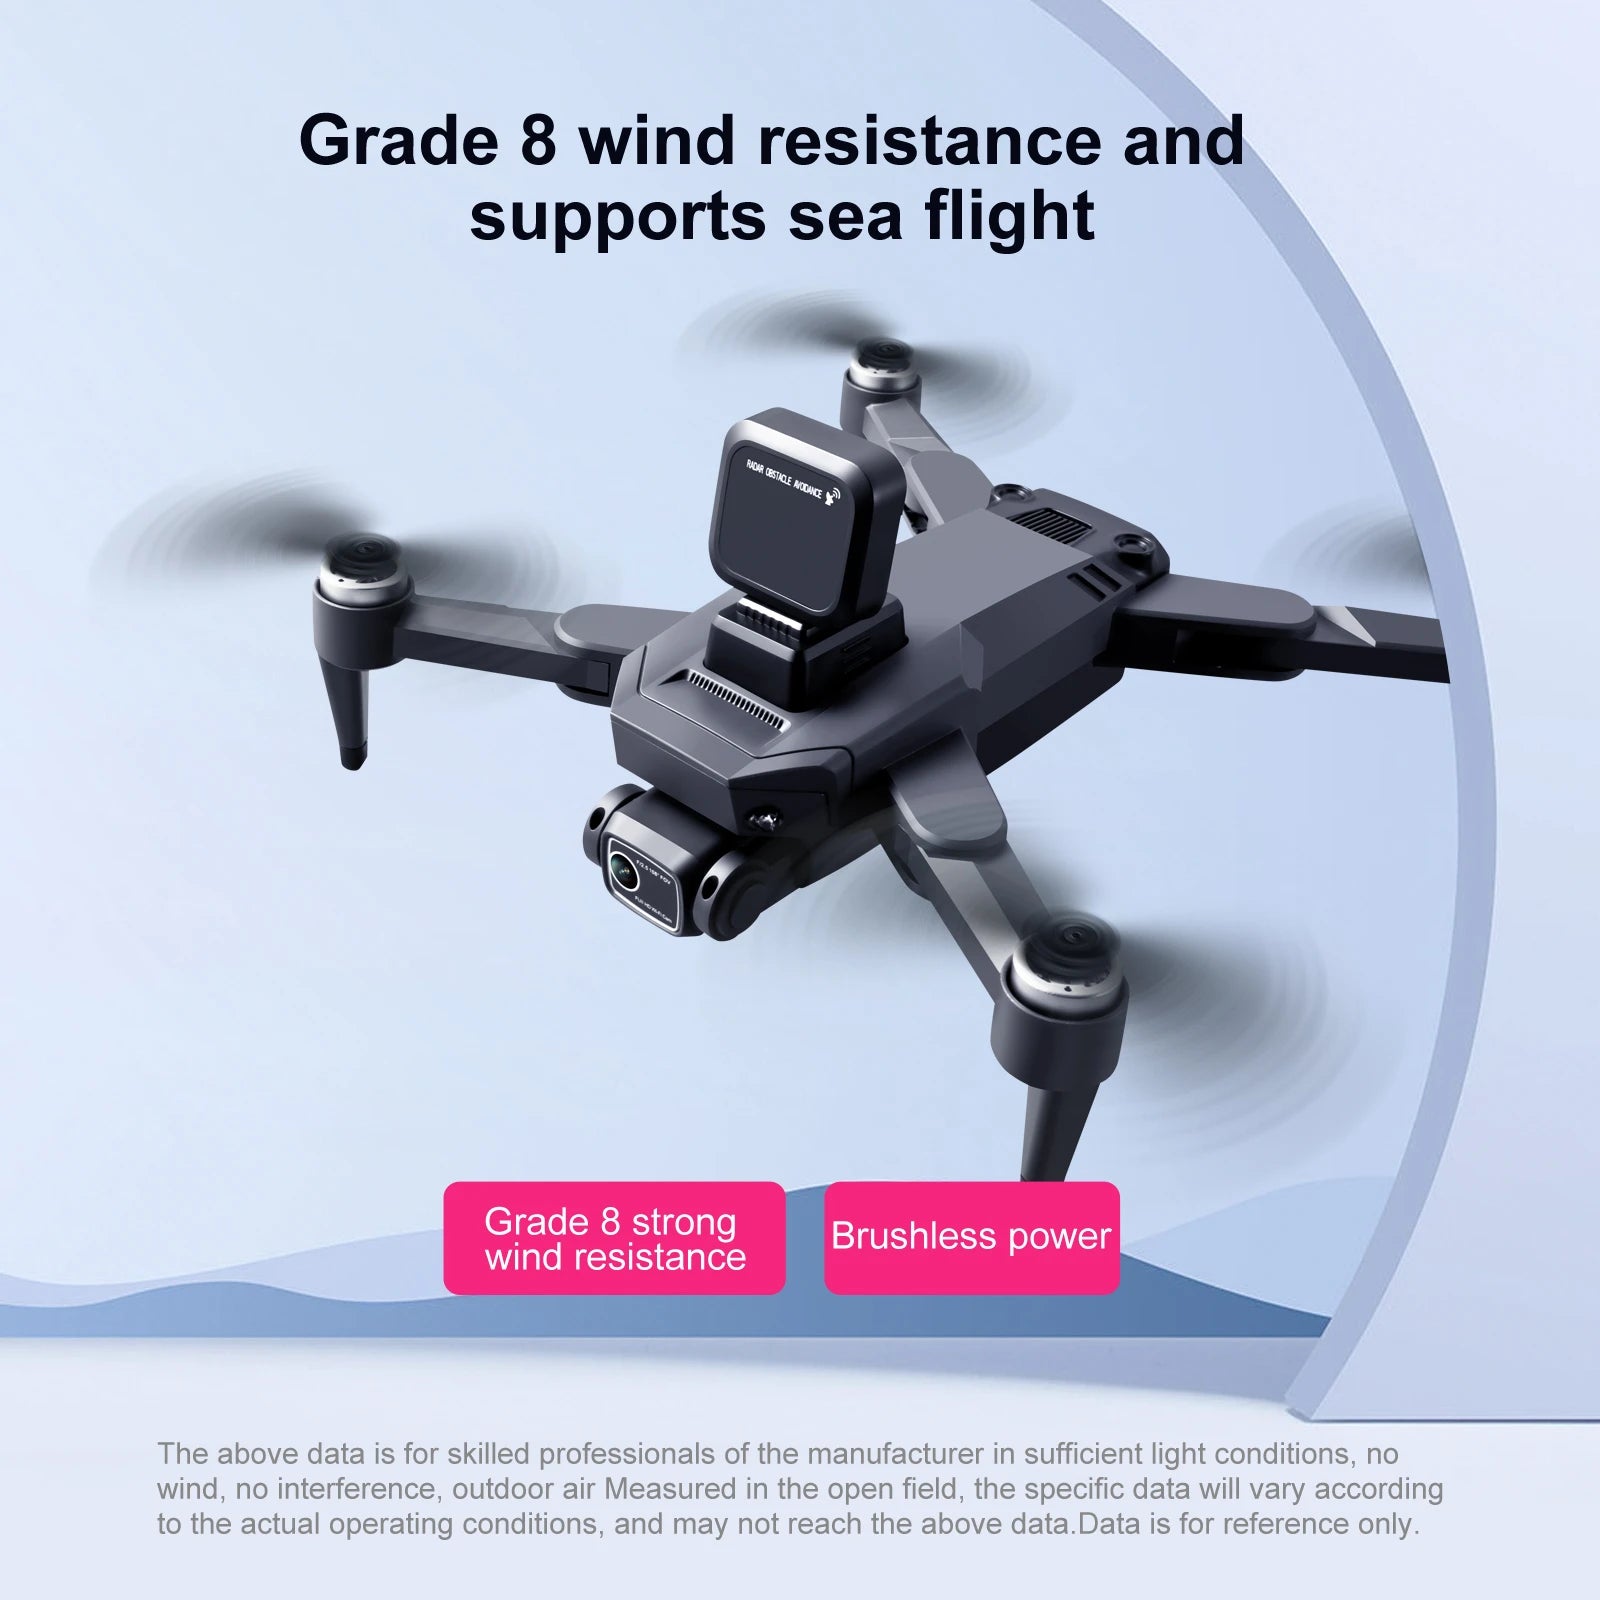 S109 GPS Drone, the above data is for skilled professionals of the manufacturer in sufficient light conditions, no wind, no